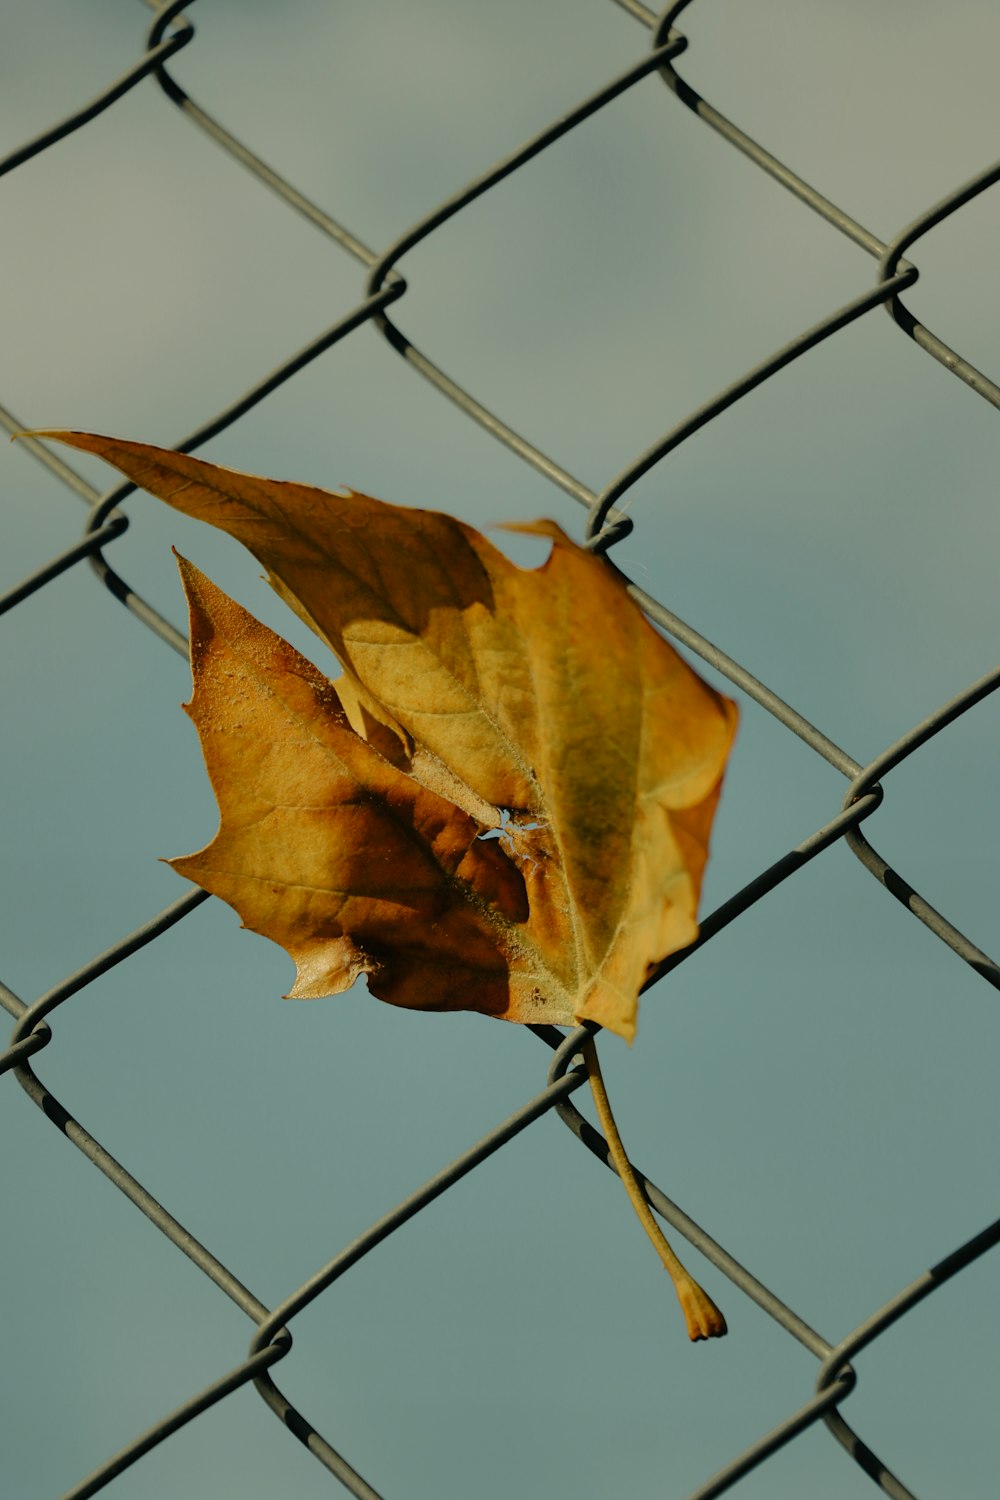 a leaf that is sitting on a chain link fence